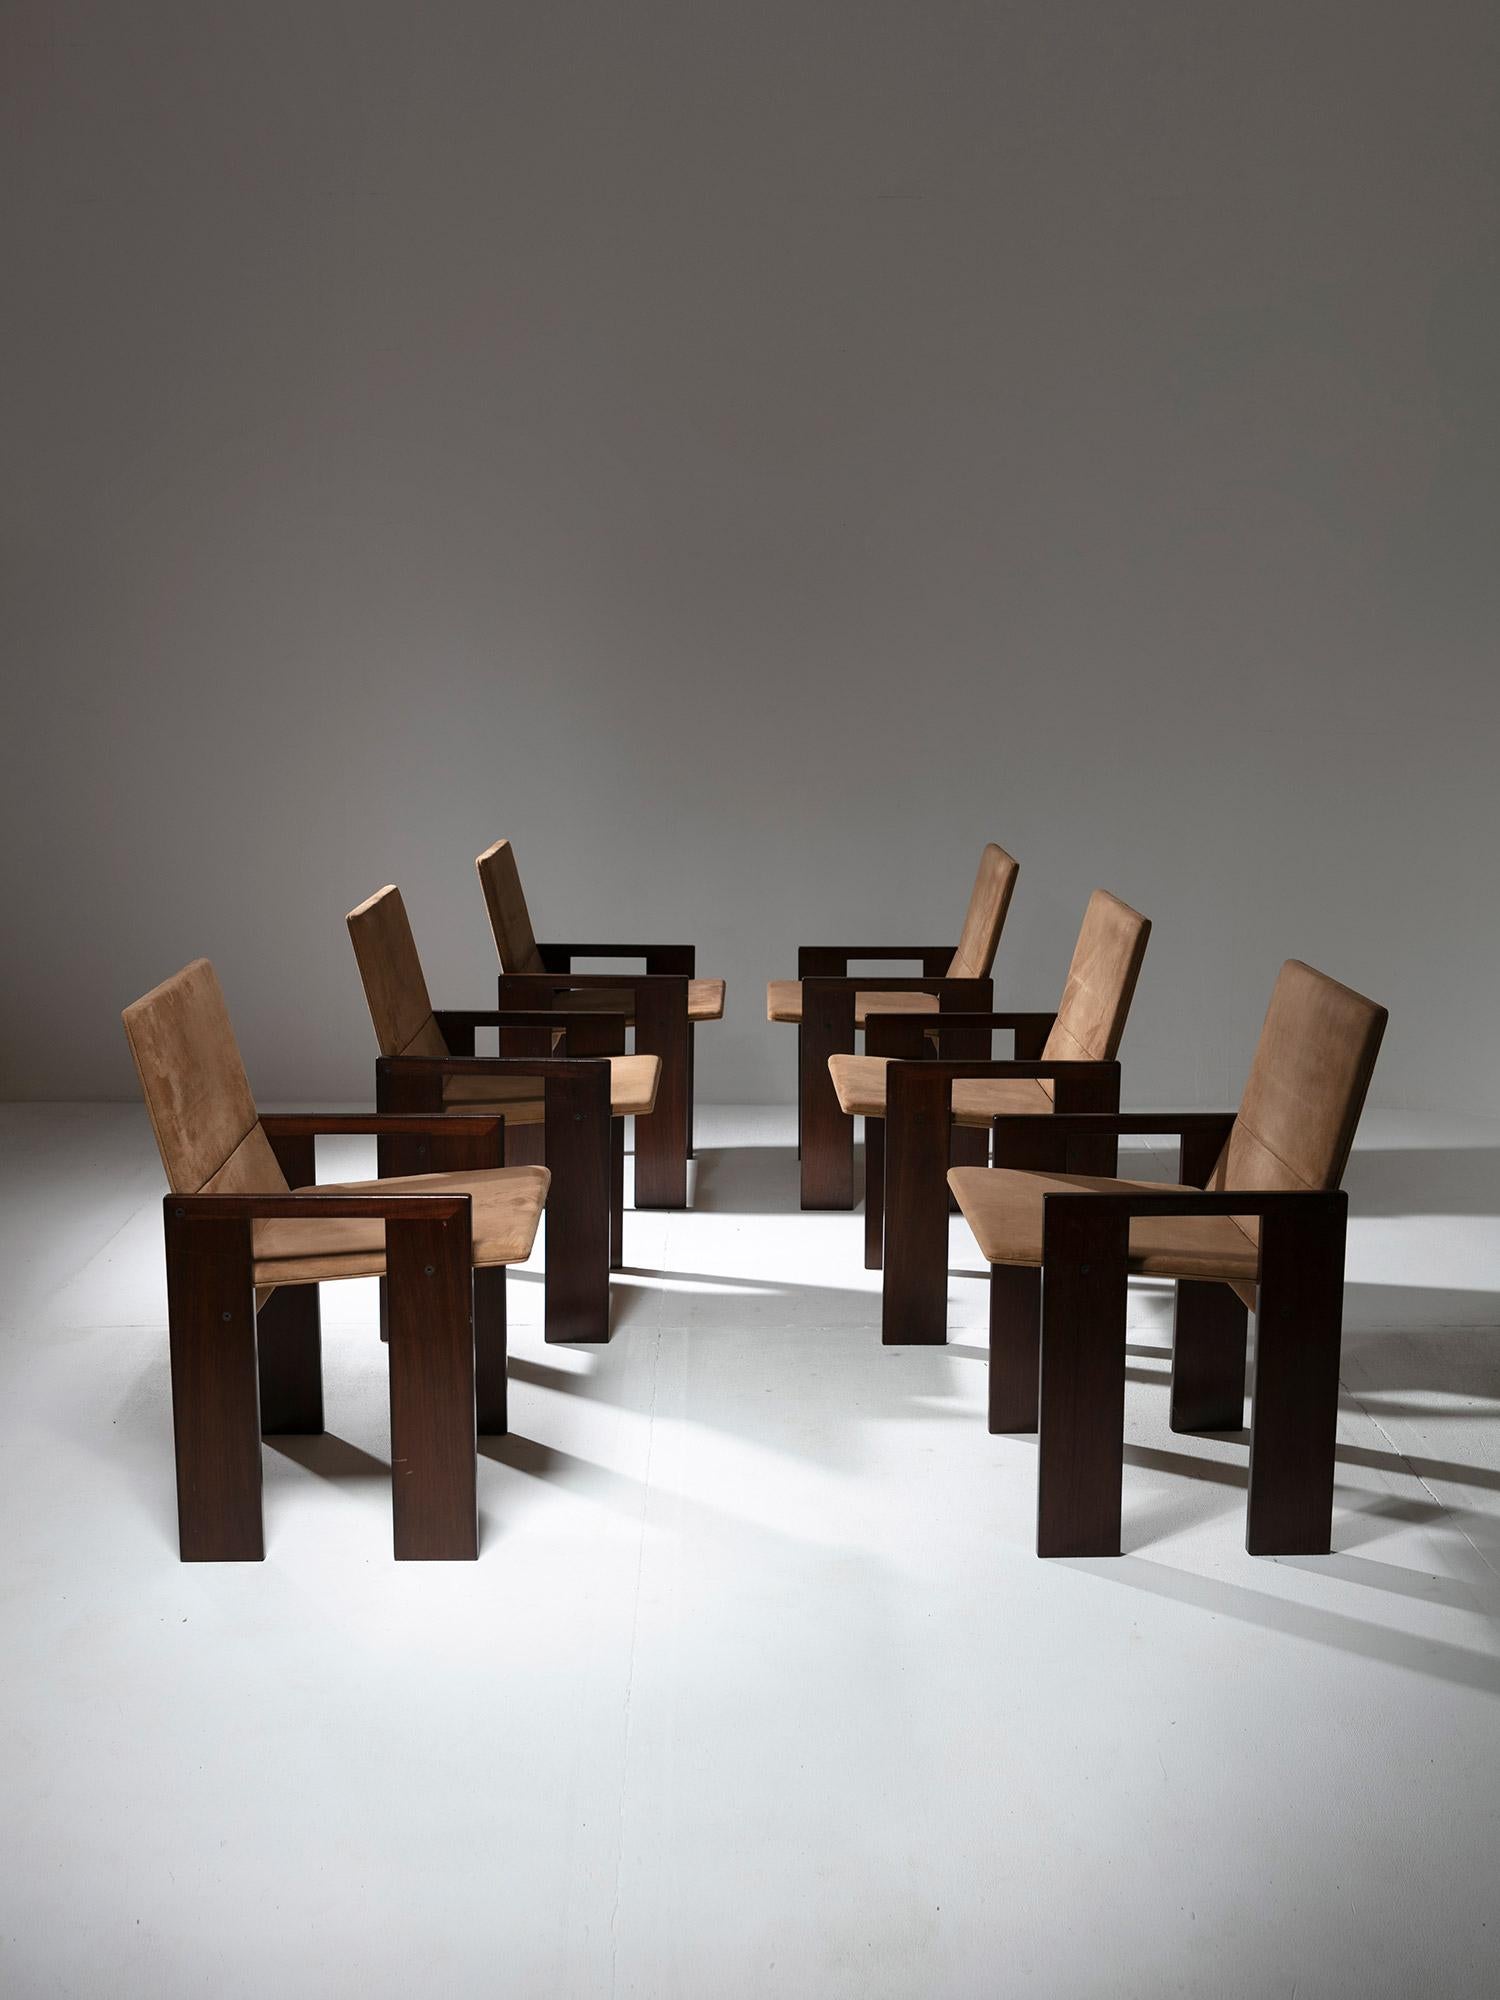 Set of six chairs model SD60 by Marco Zanuso for Poggi.
Variation of the chairs designed in 1963-75 for IBM headquarter office furniture.
Chair is composed by two solid walnut U shaped elements supporting a padded part covered with suede.